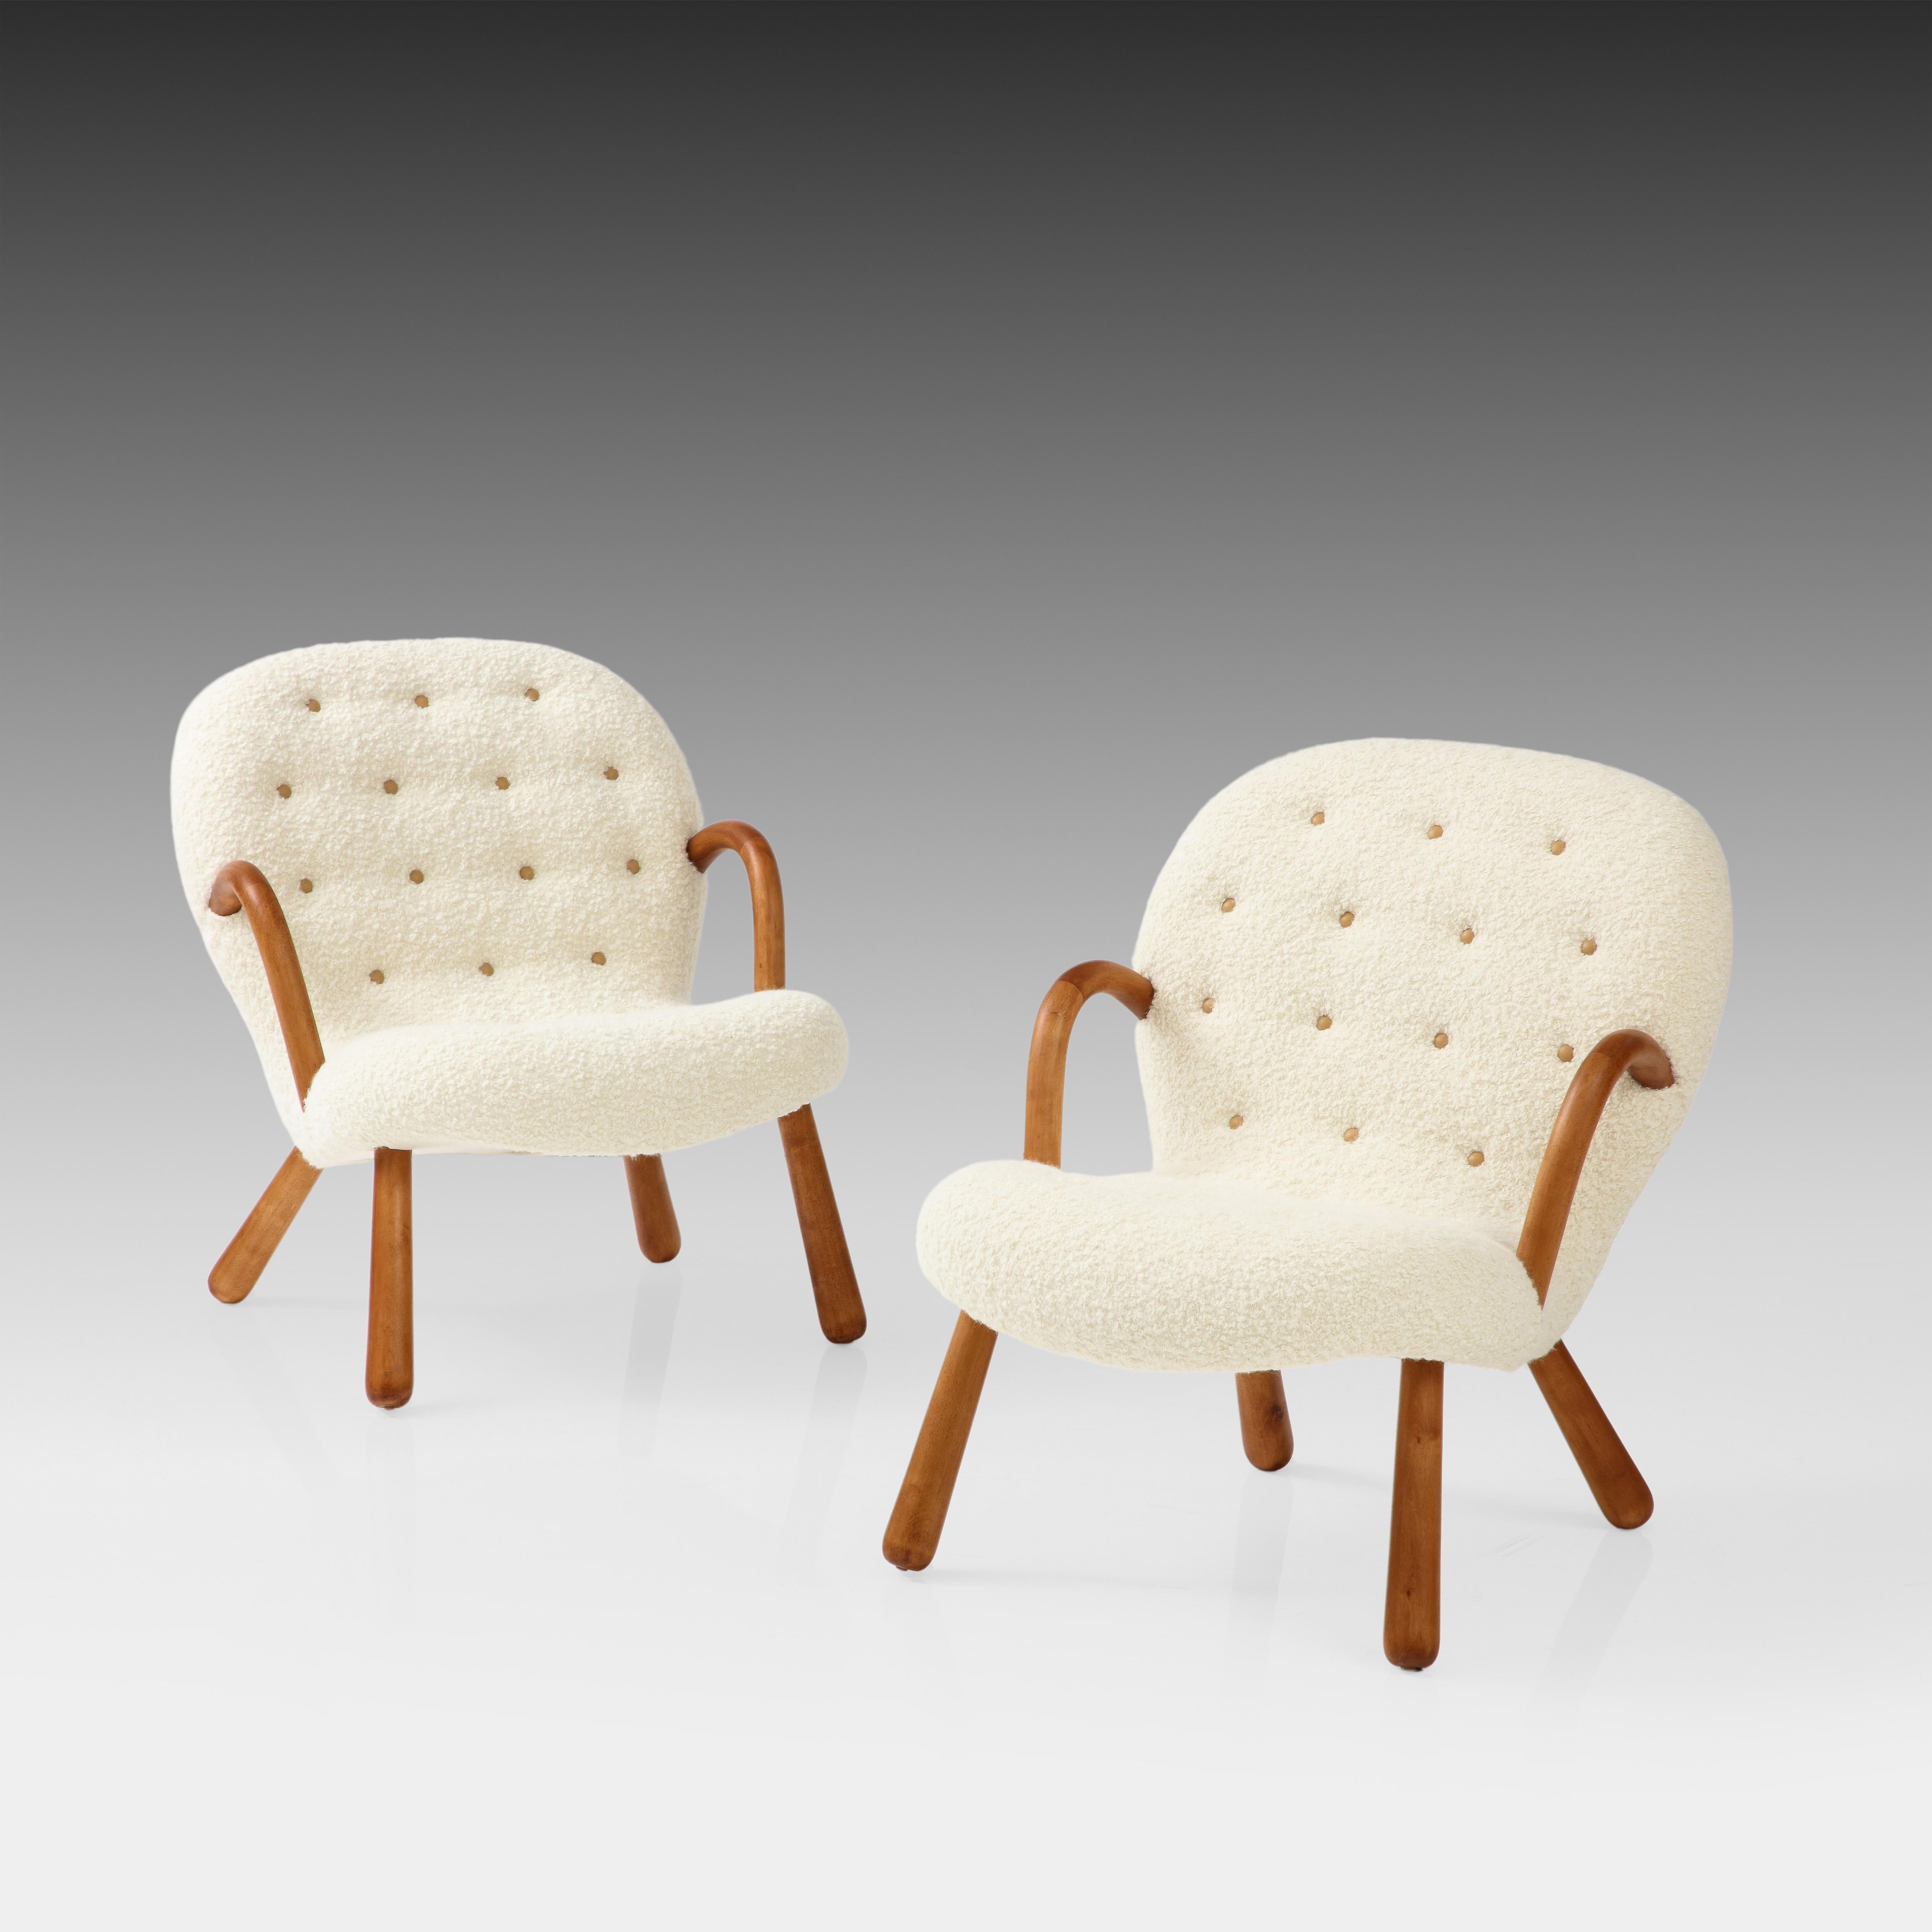 Arnold Madsen for Madsen & Schubell Rare Pair of Clam Chairs, Denmark, 1944 For Sale 1